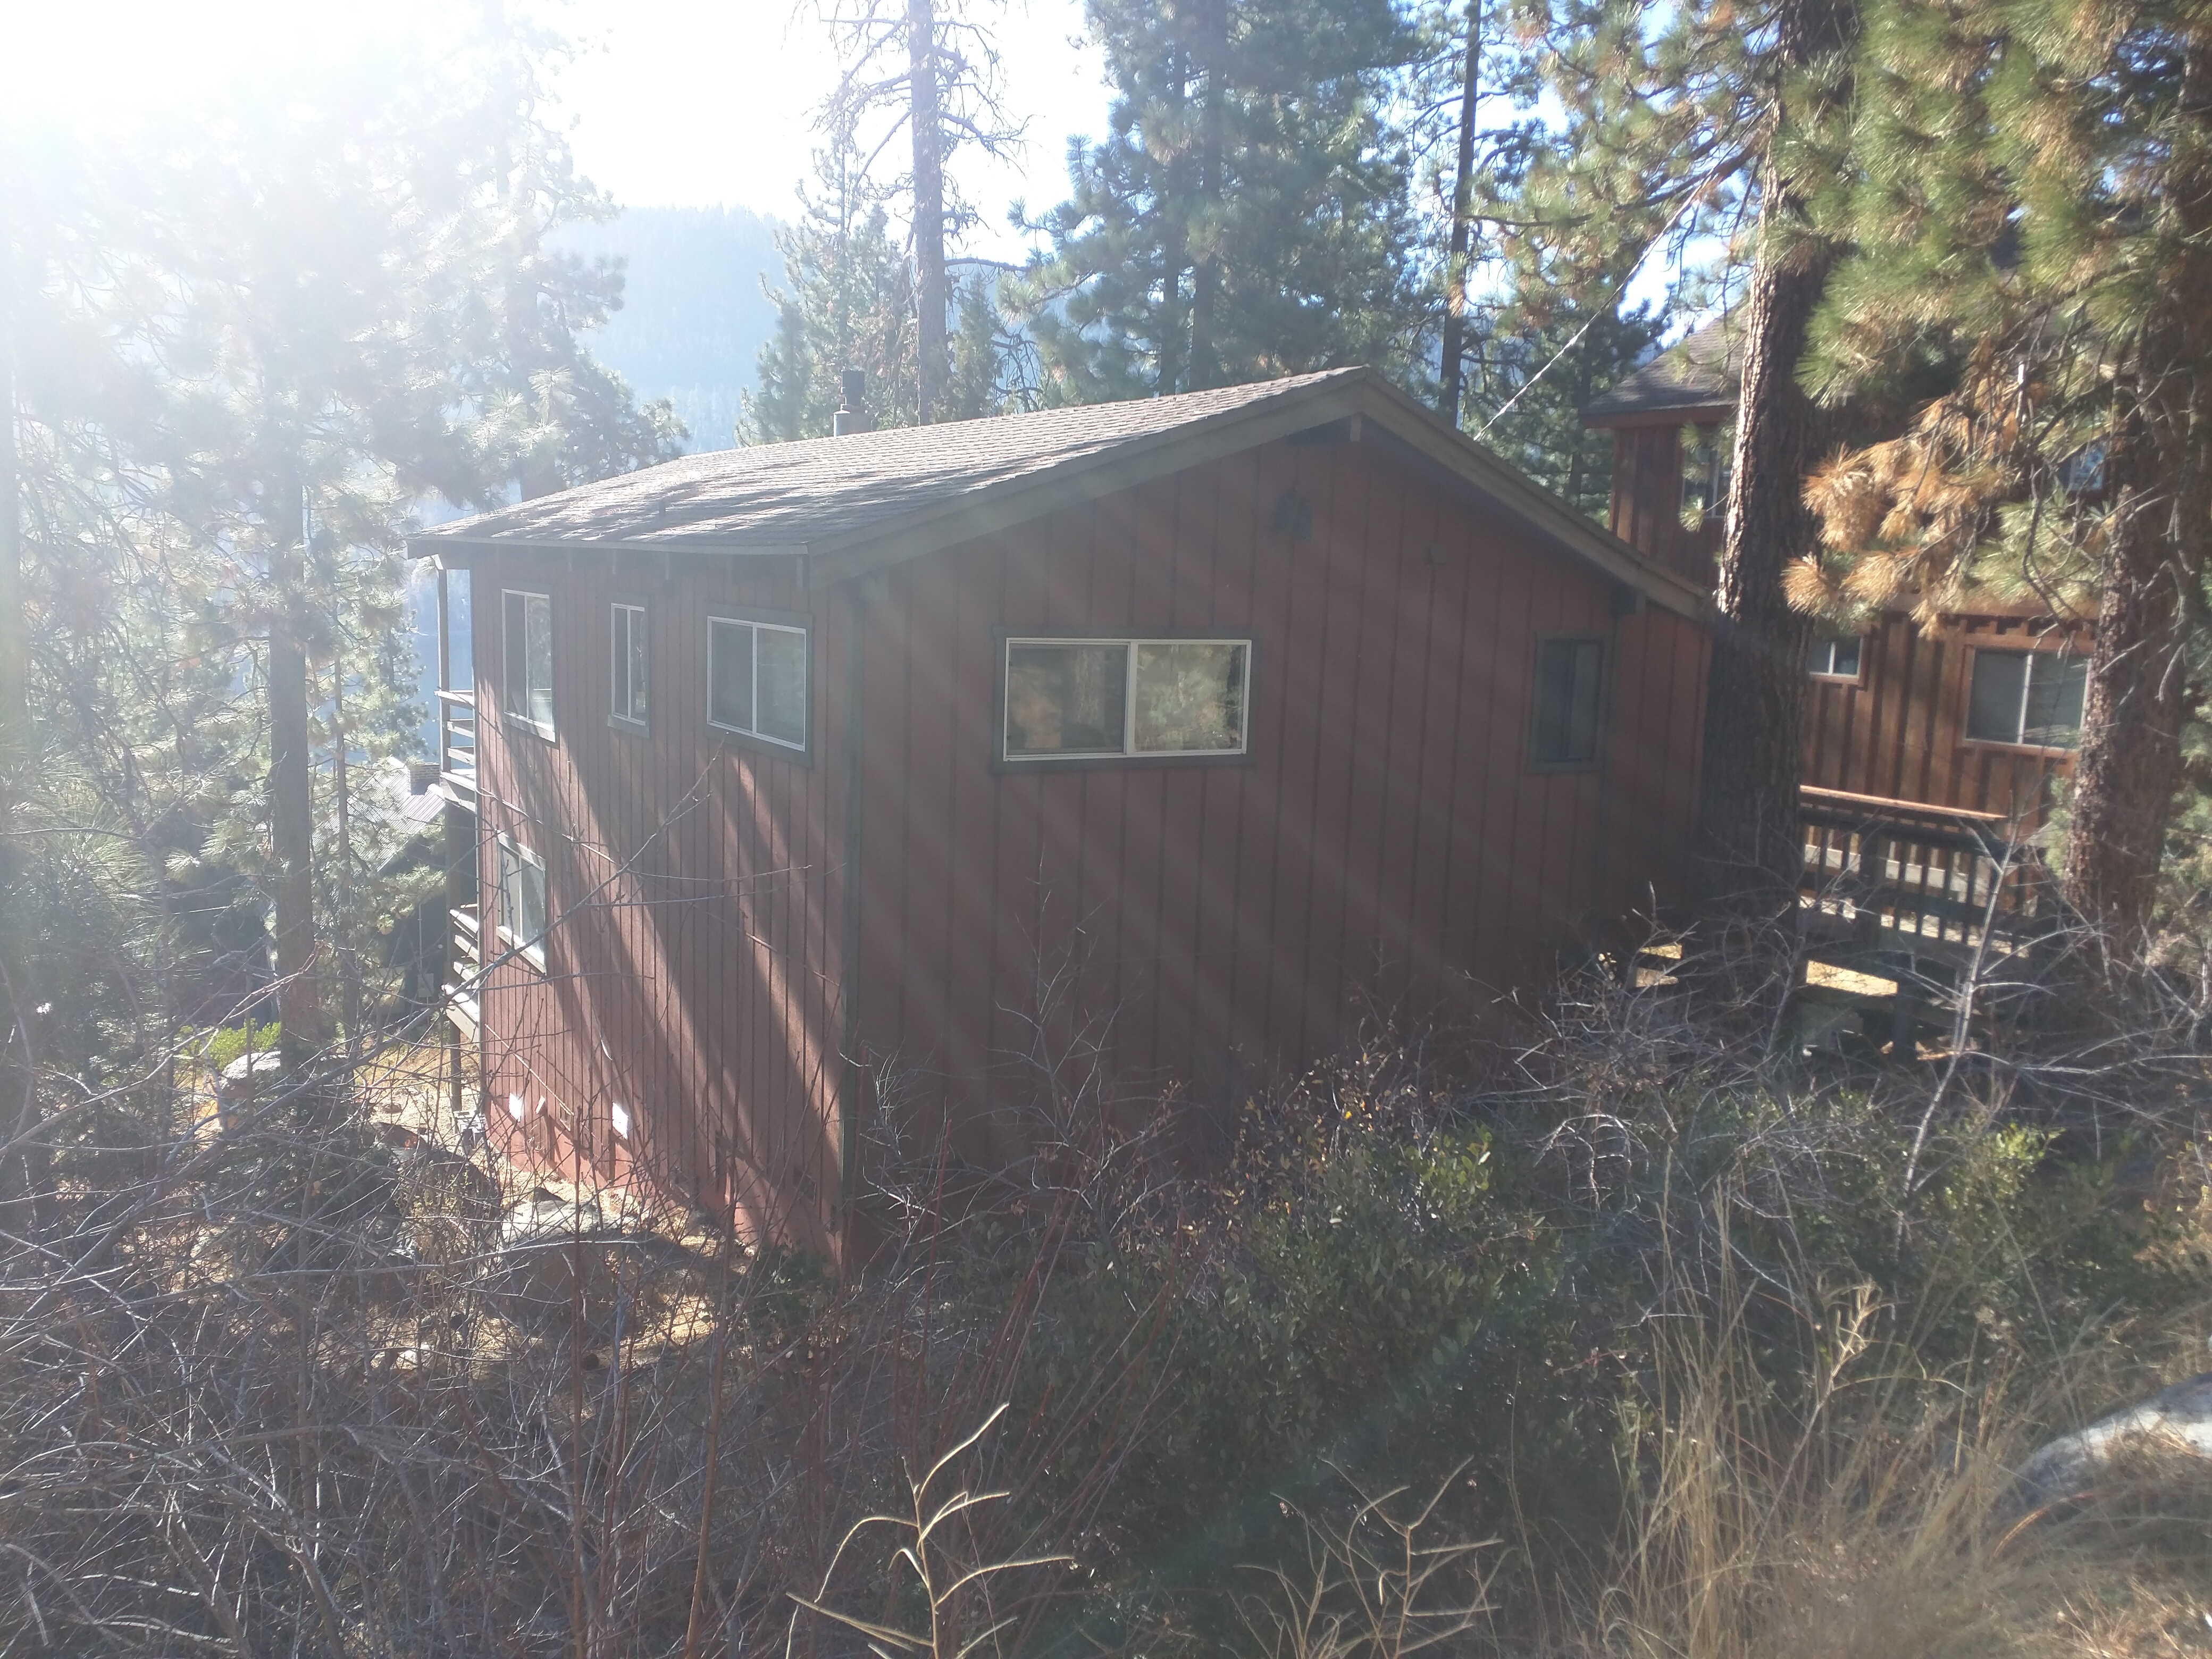 This Truckee rental is located at 14445 DENTON AVENUE.